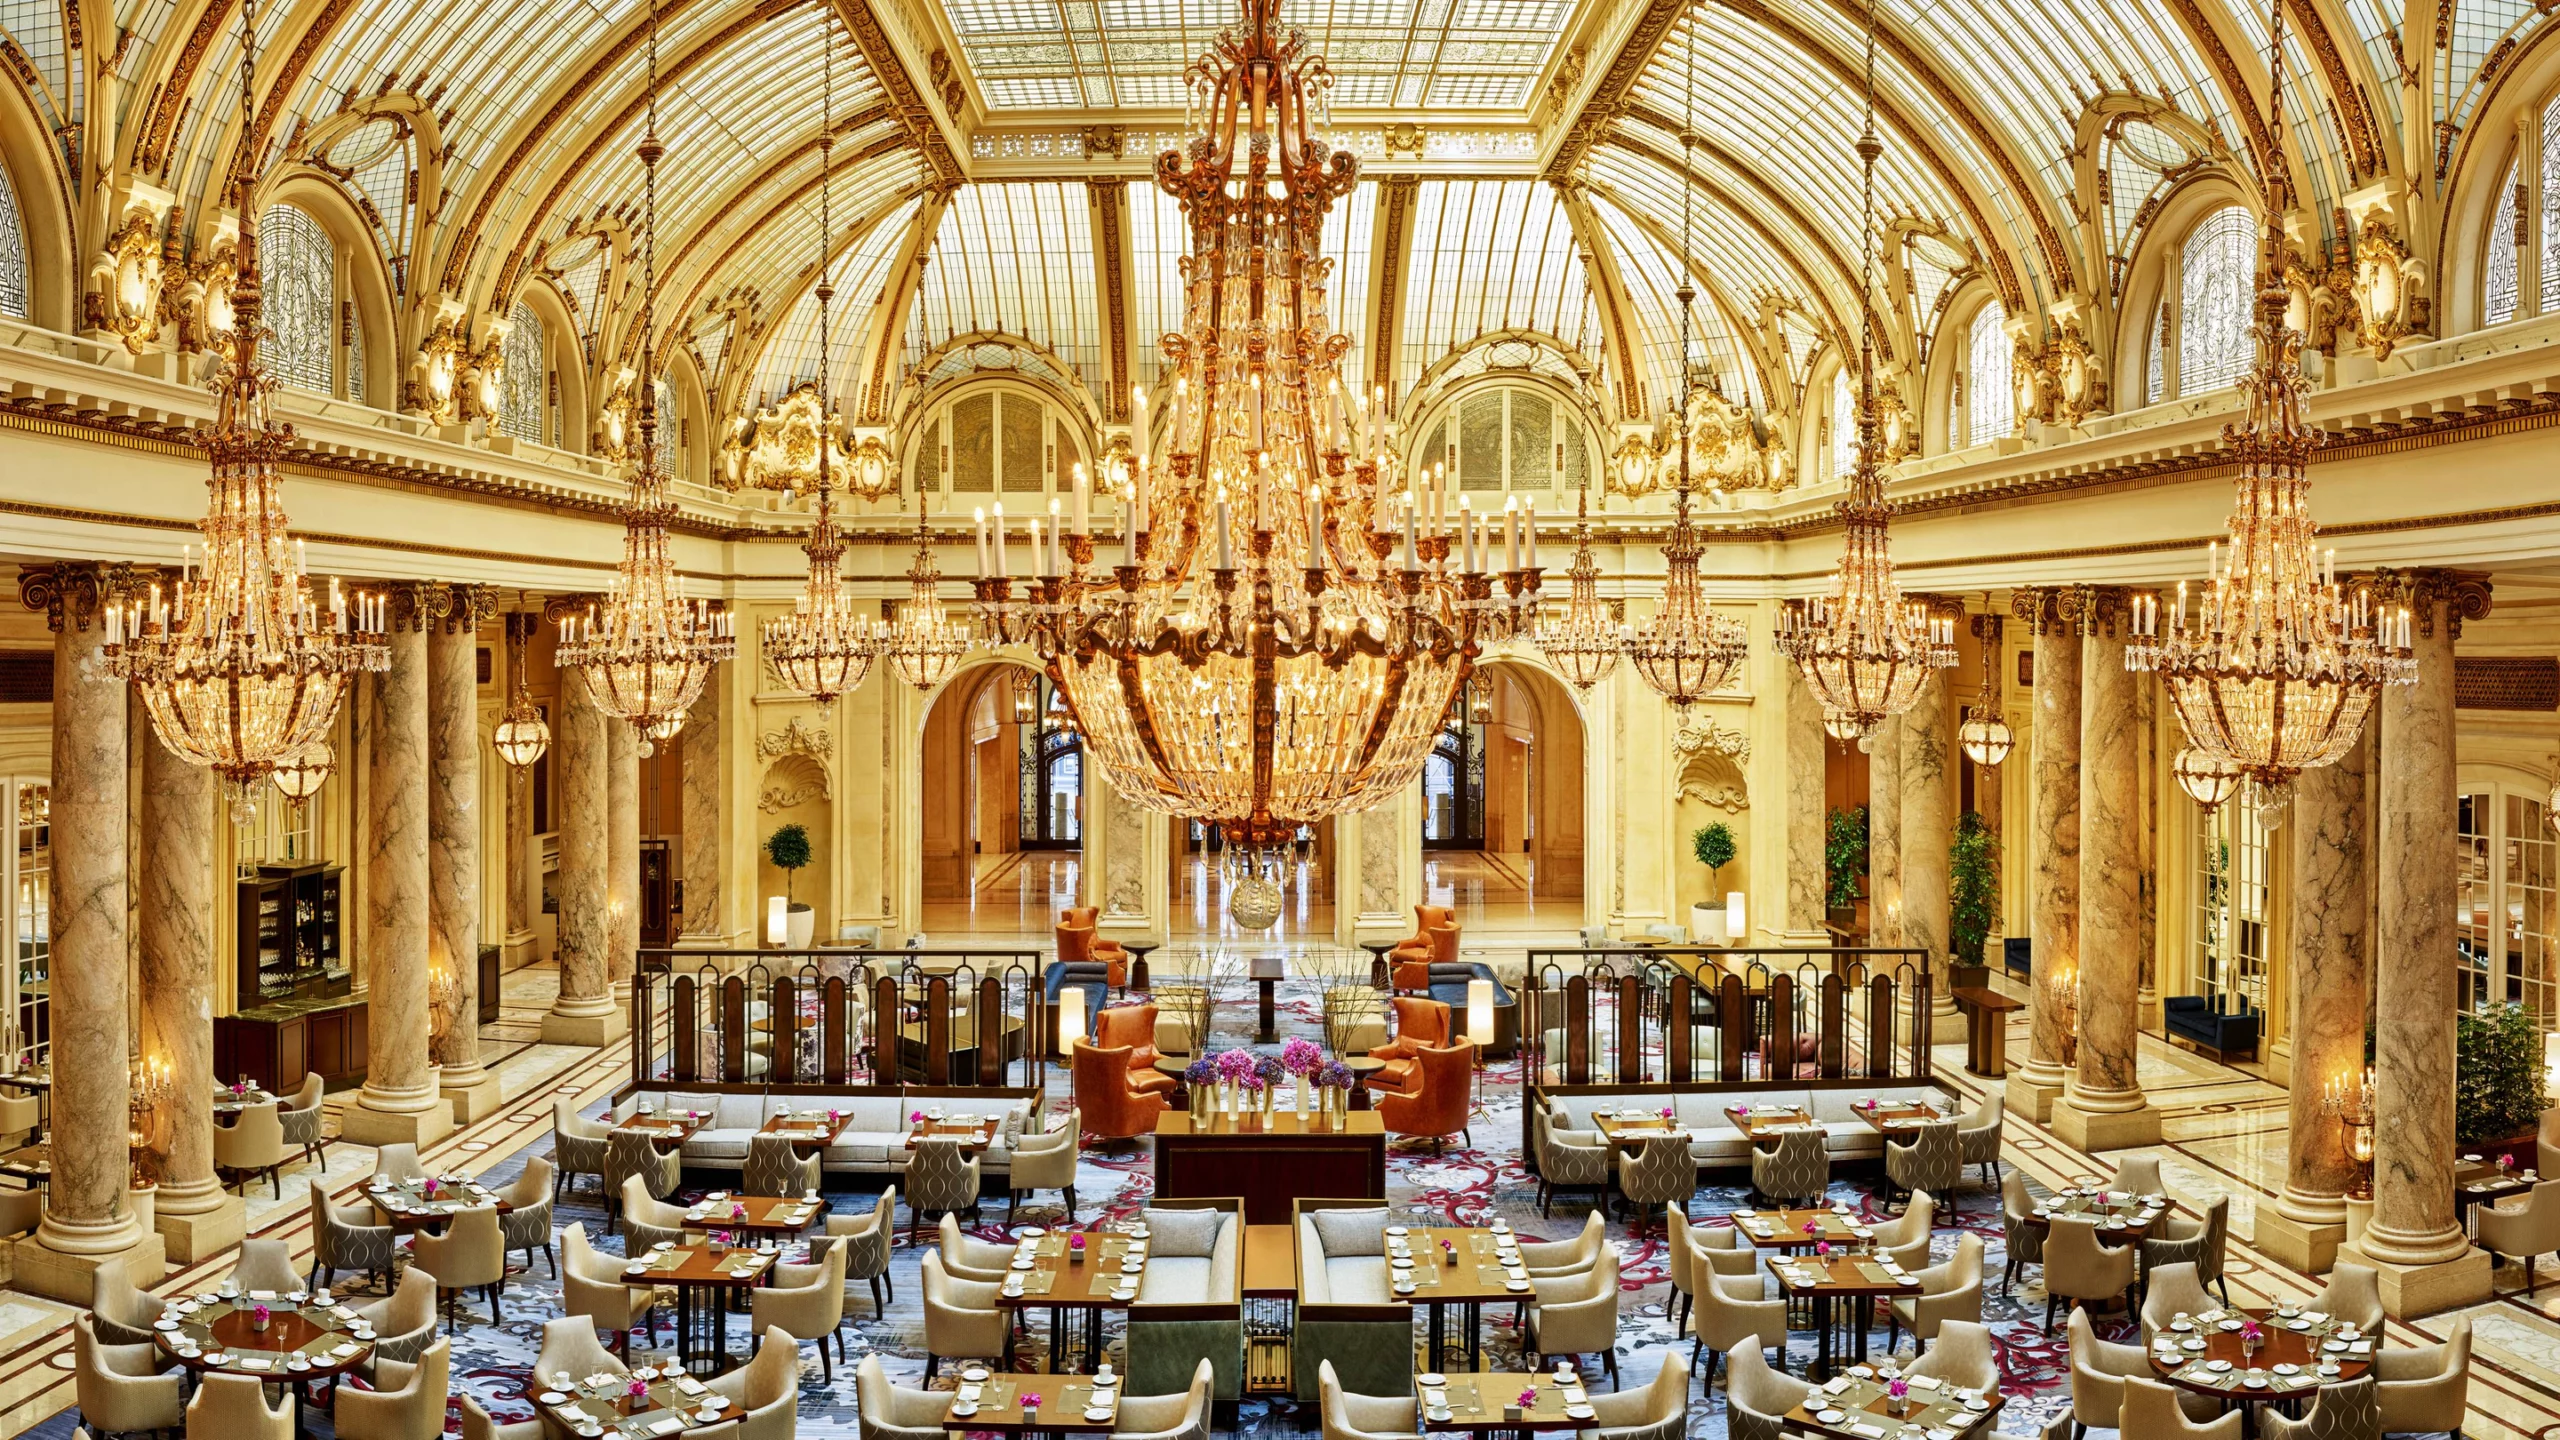 A meeting space in Palace hotel in San Francisco. It has a highly detailed yellow interior with a series of tables and chairs.